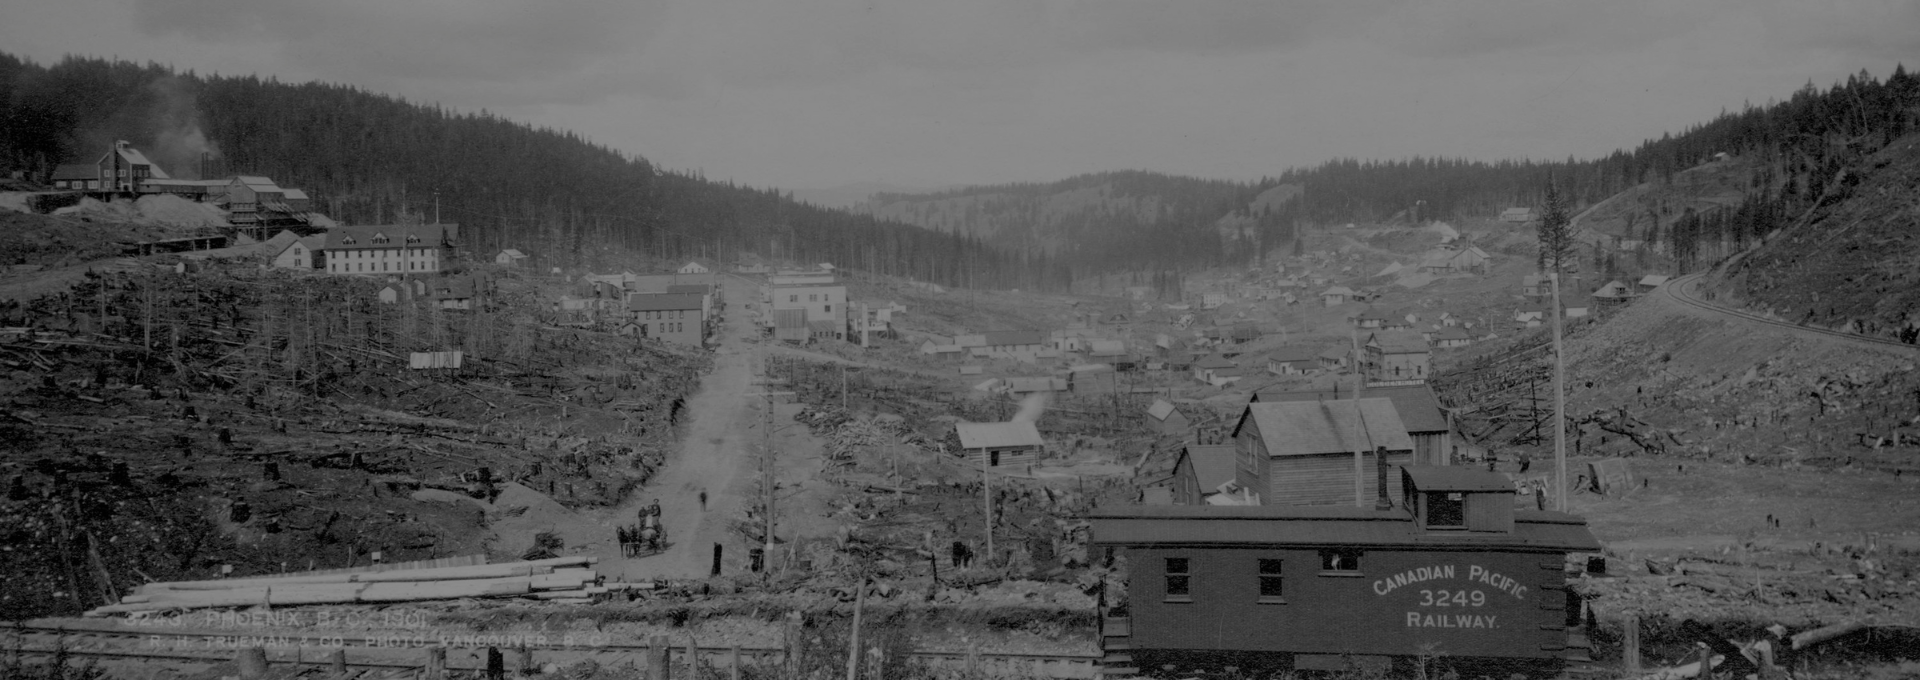 birds eye view of an industrial town in the 1920s in BC